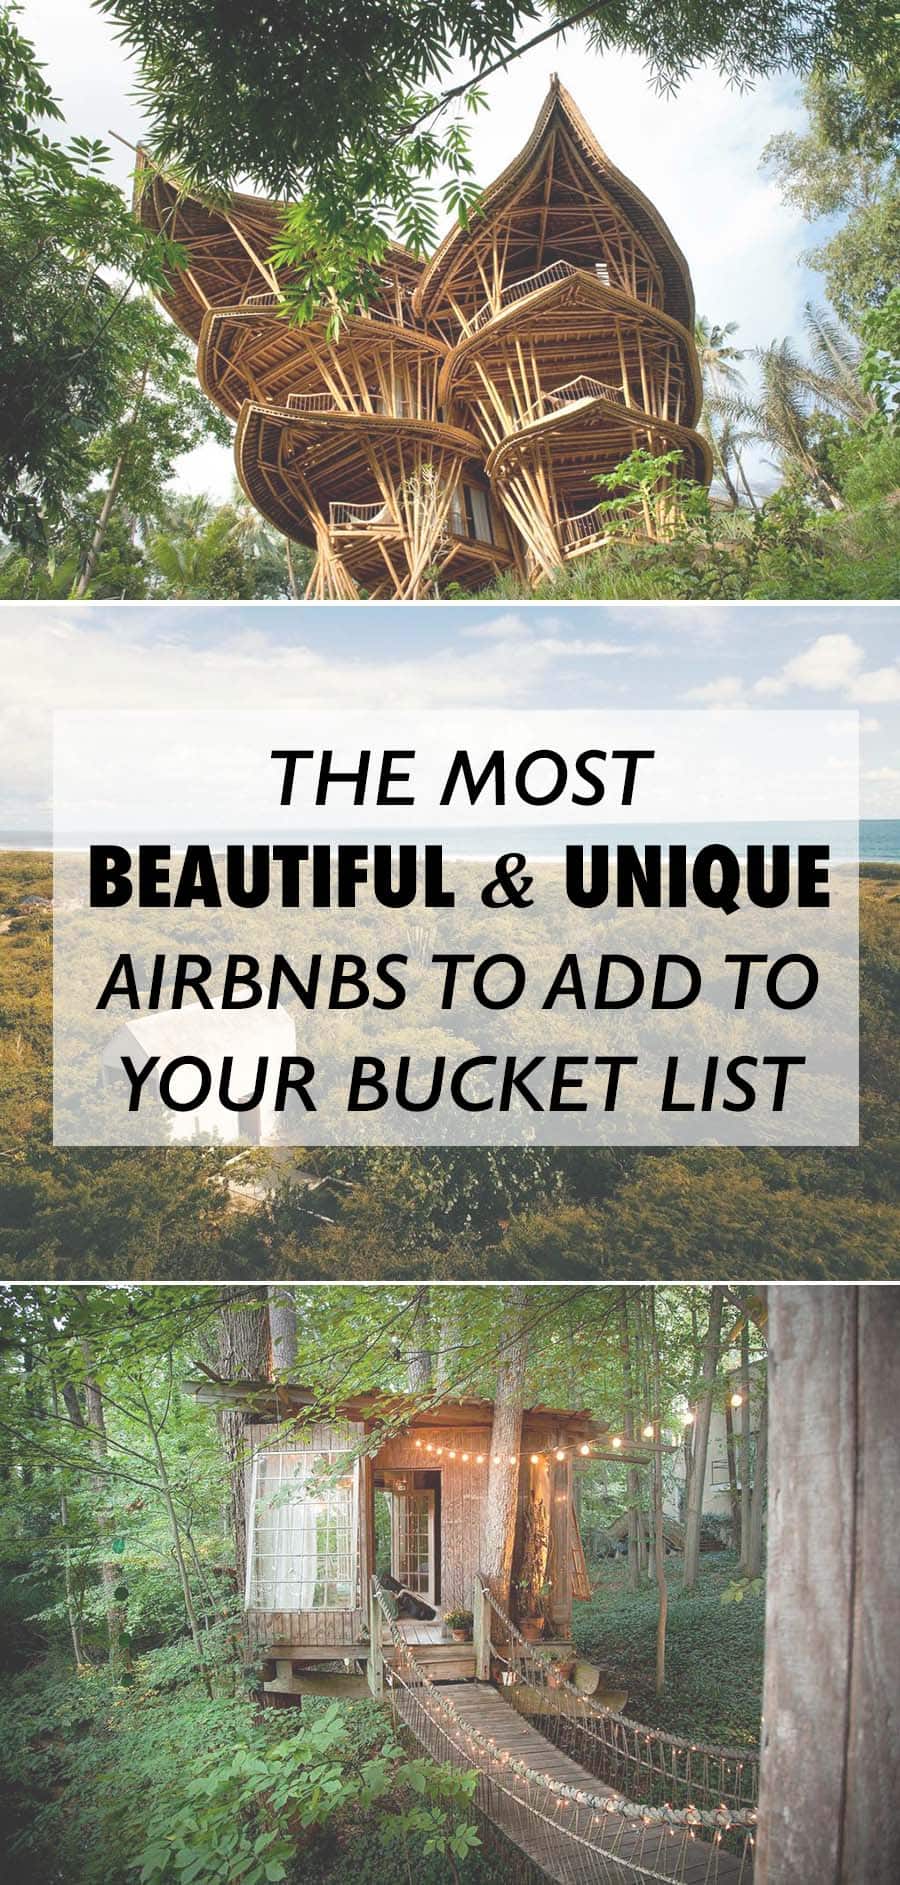 The Most Beautiful and Unique Airbnbs to Add to Your 2018 Bucket List